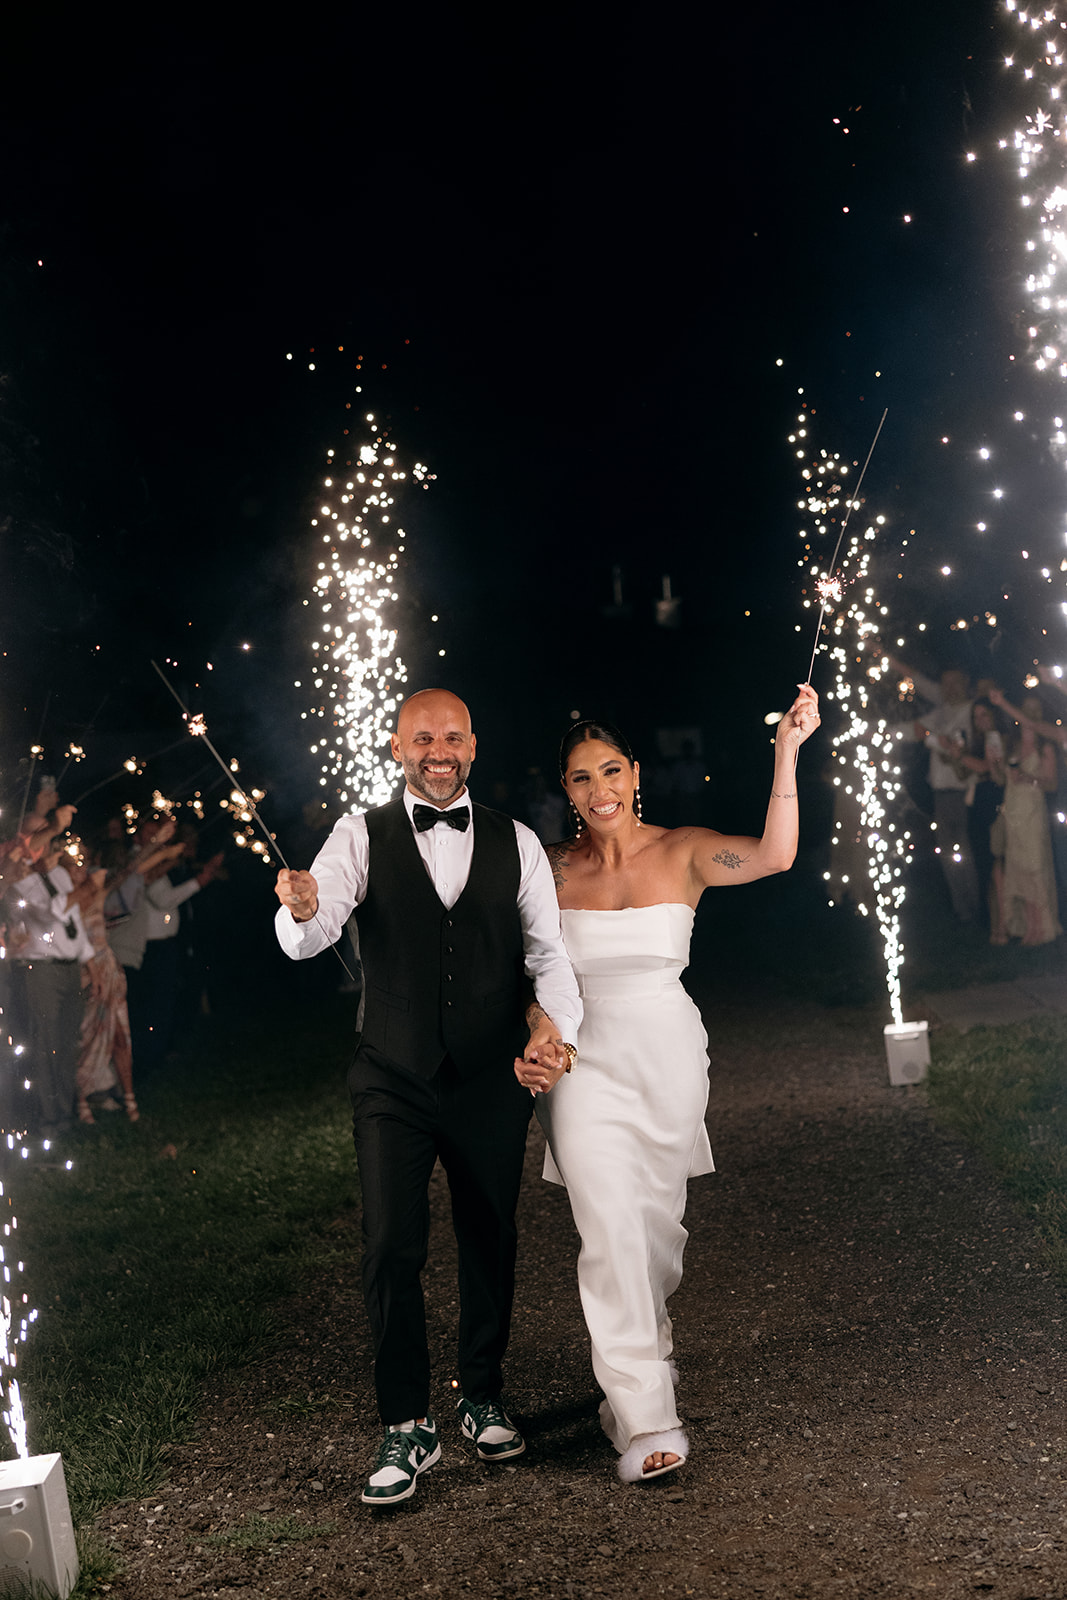 Bride and groom sparkler exit during wedding reception at Audrey's Farmhouse